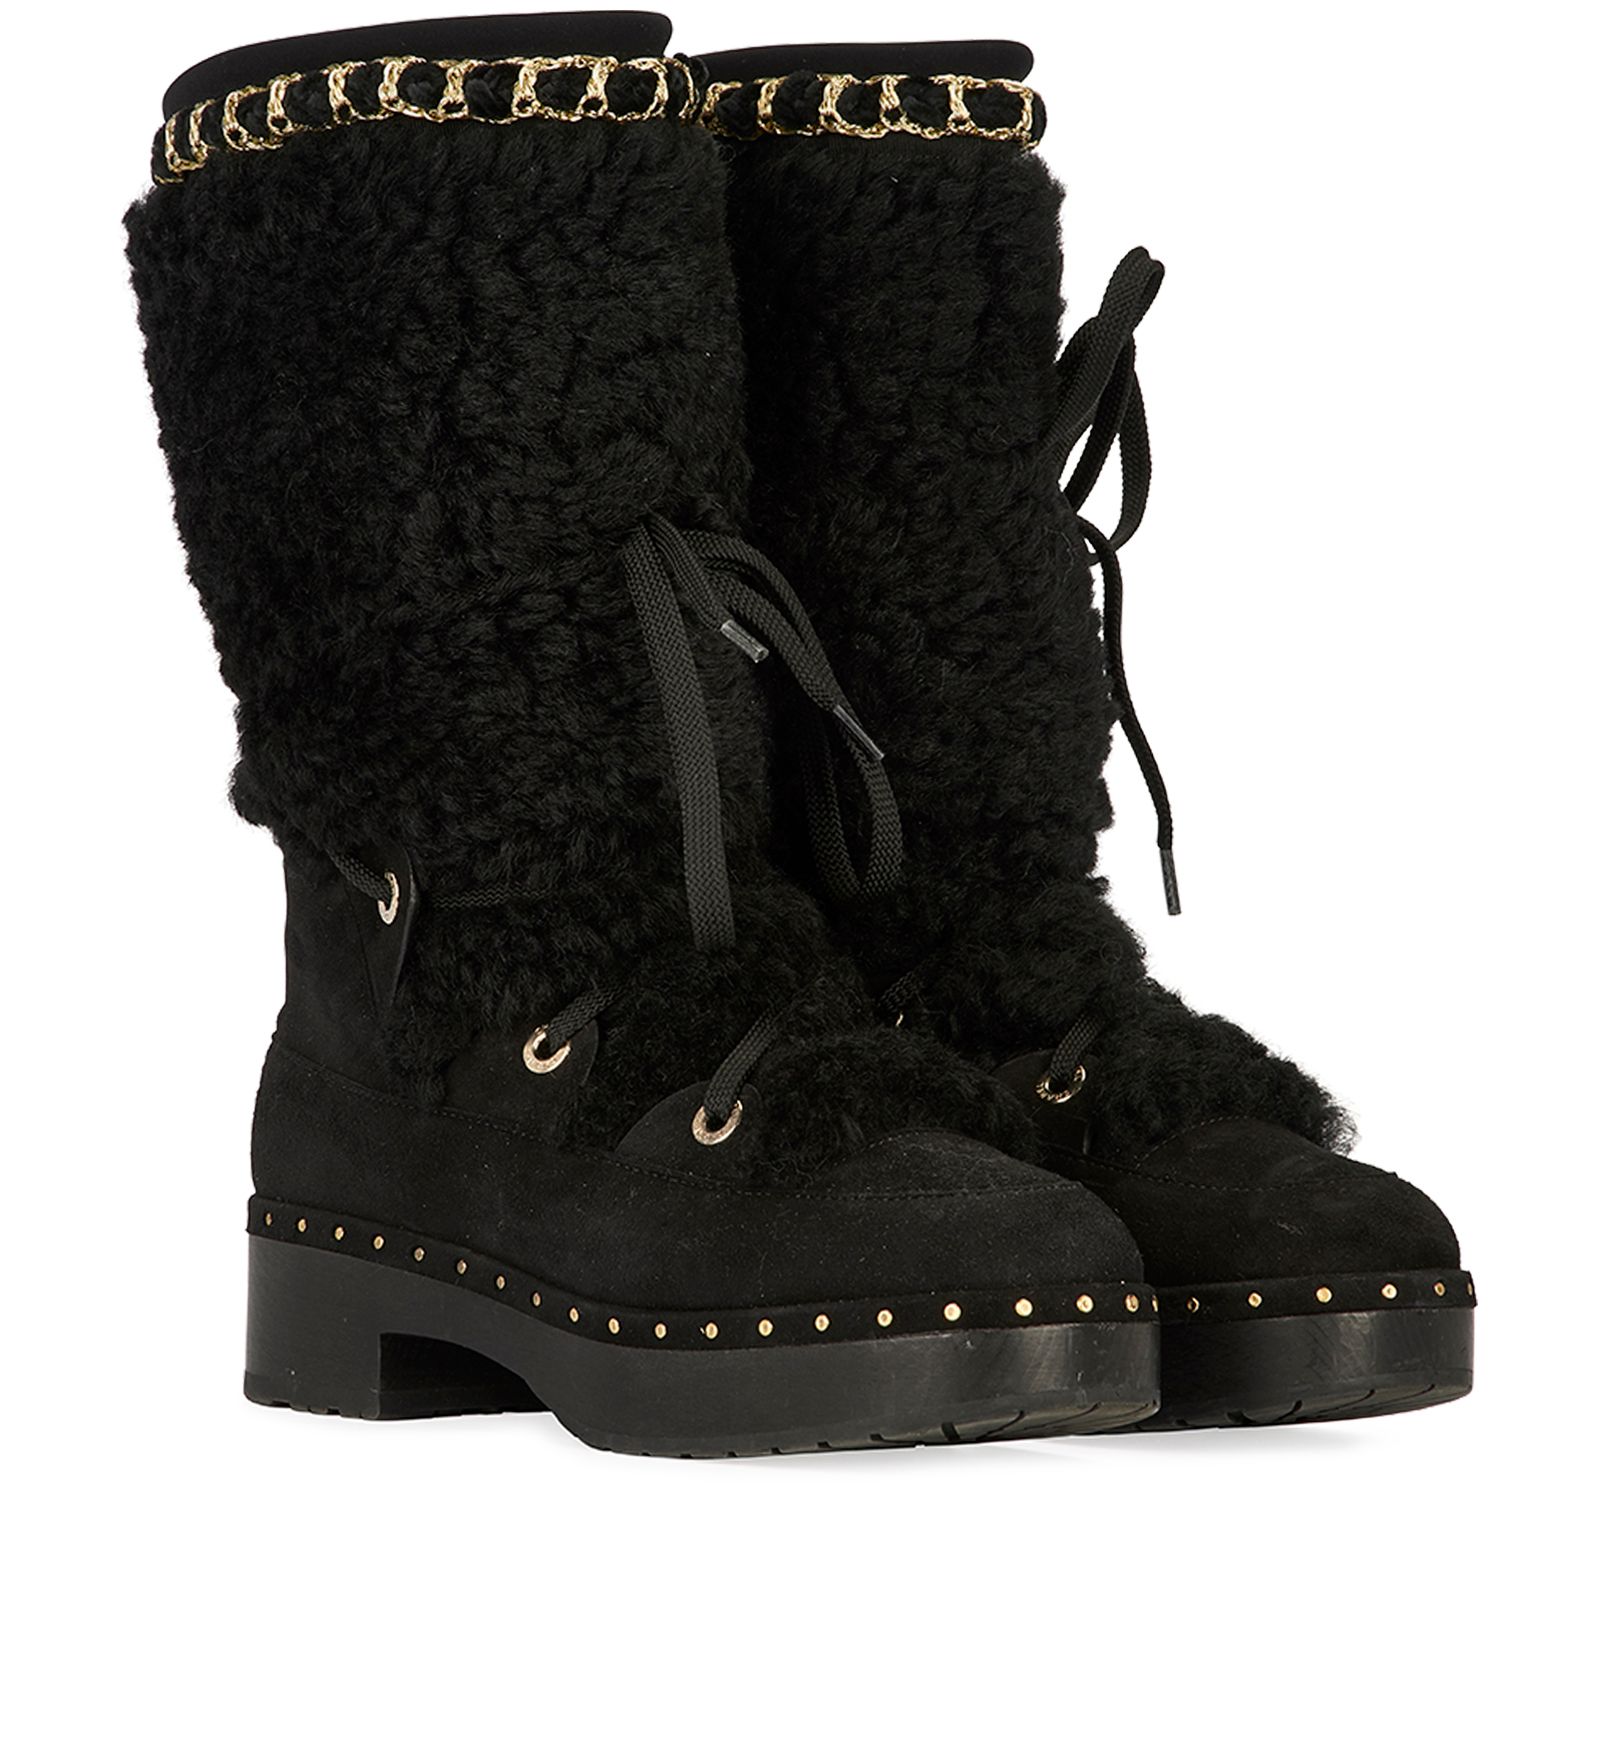 Chanel shearling and chain short boot size 39.5 895.00